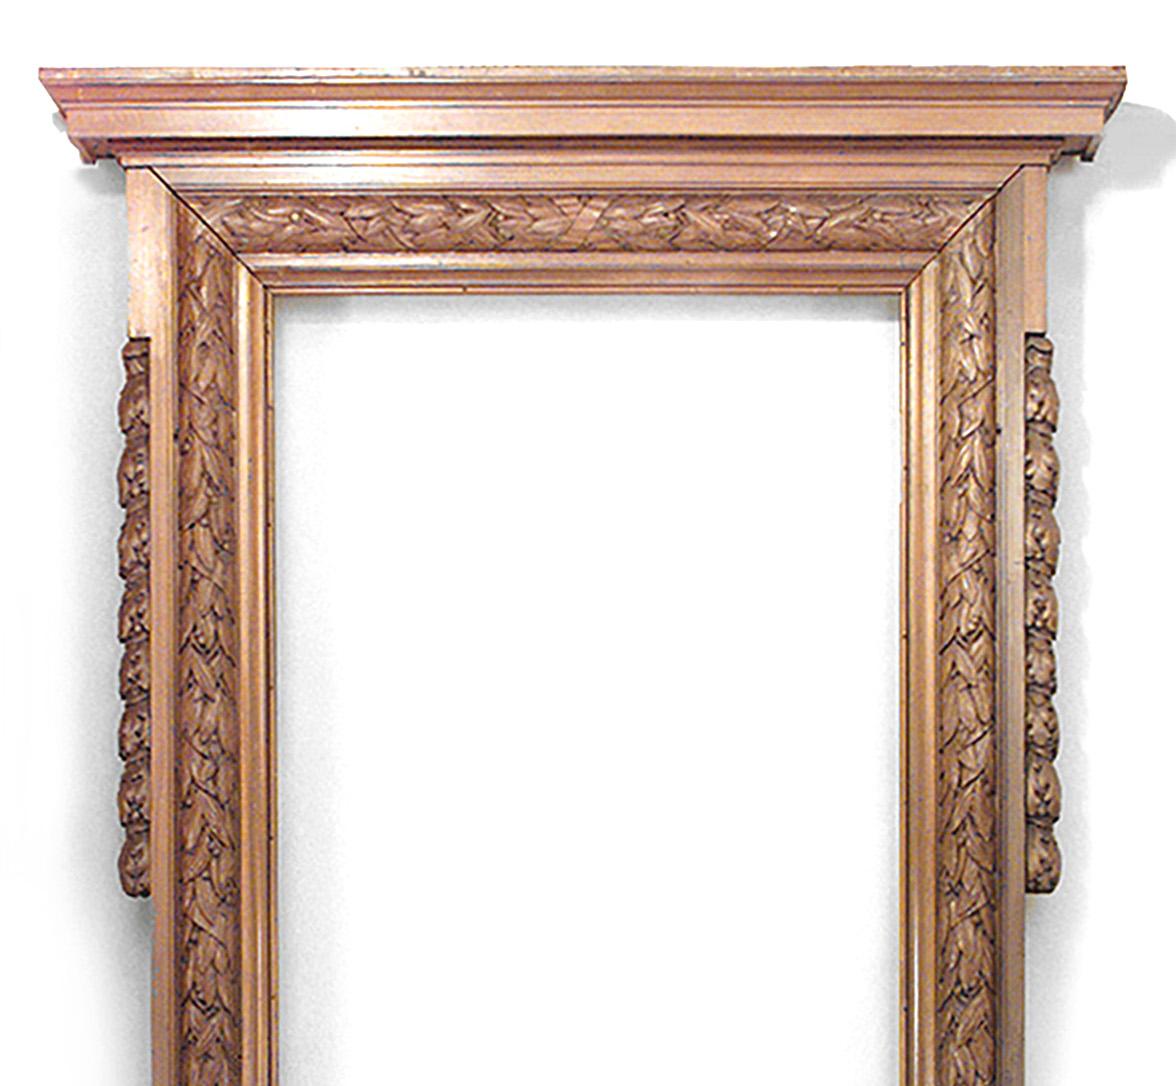 3 English Georgian style (19th Century ) mahogany carved archways with oak and laurel leaf design (Belmont Estate, Long Island)(PRICED EACH). Related items: 040434, 040434, 042543B, 042543C.
